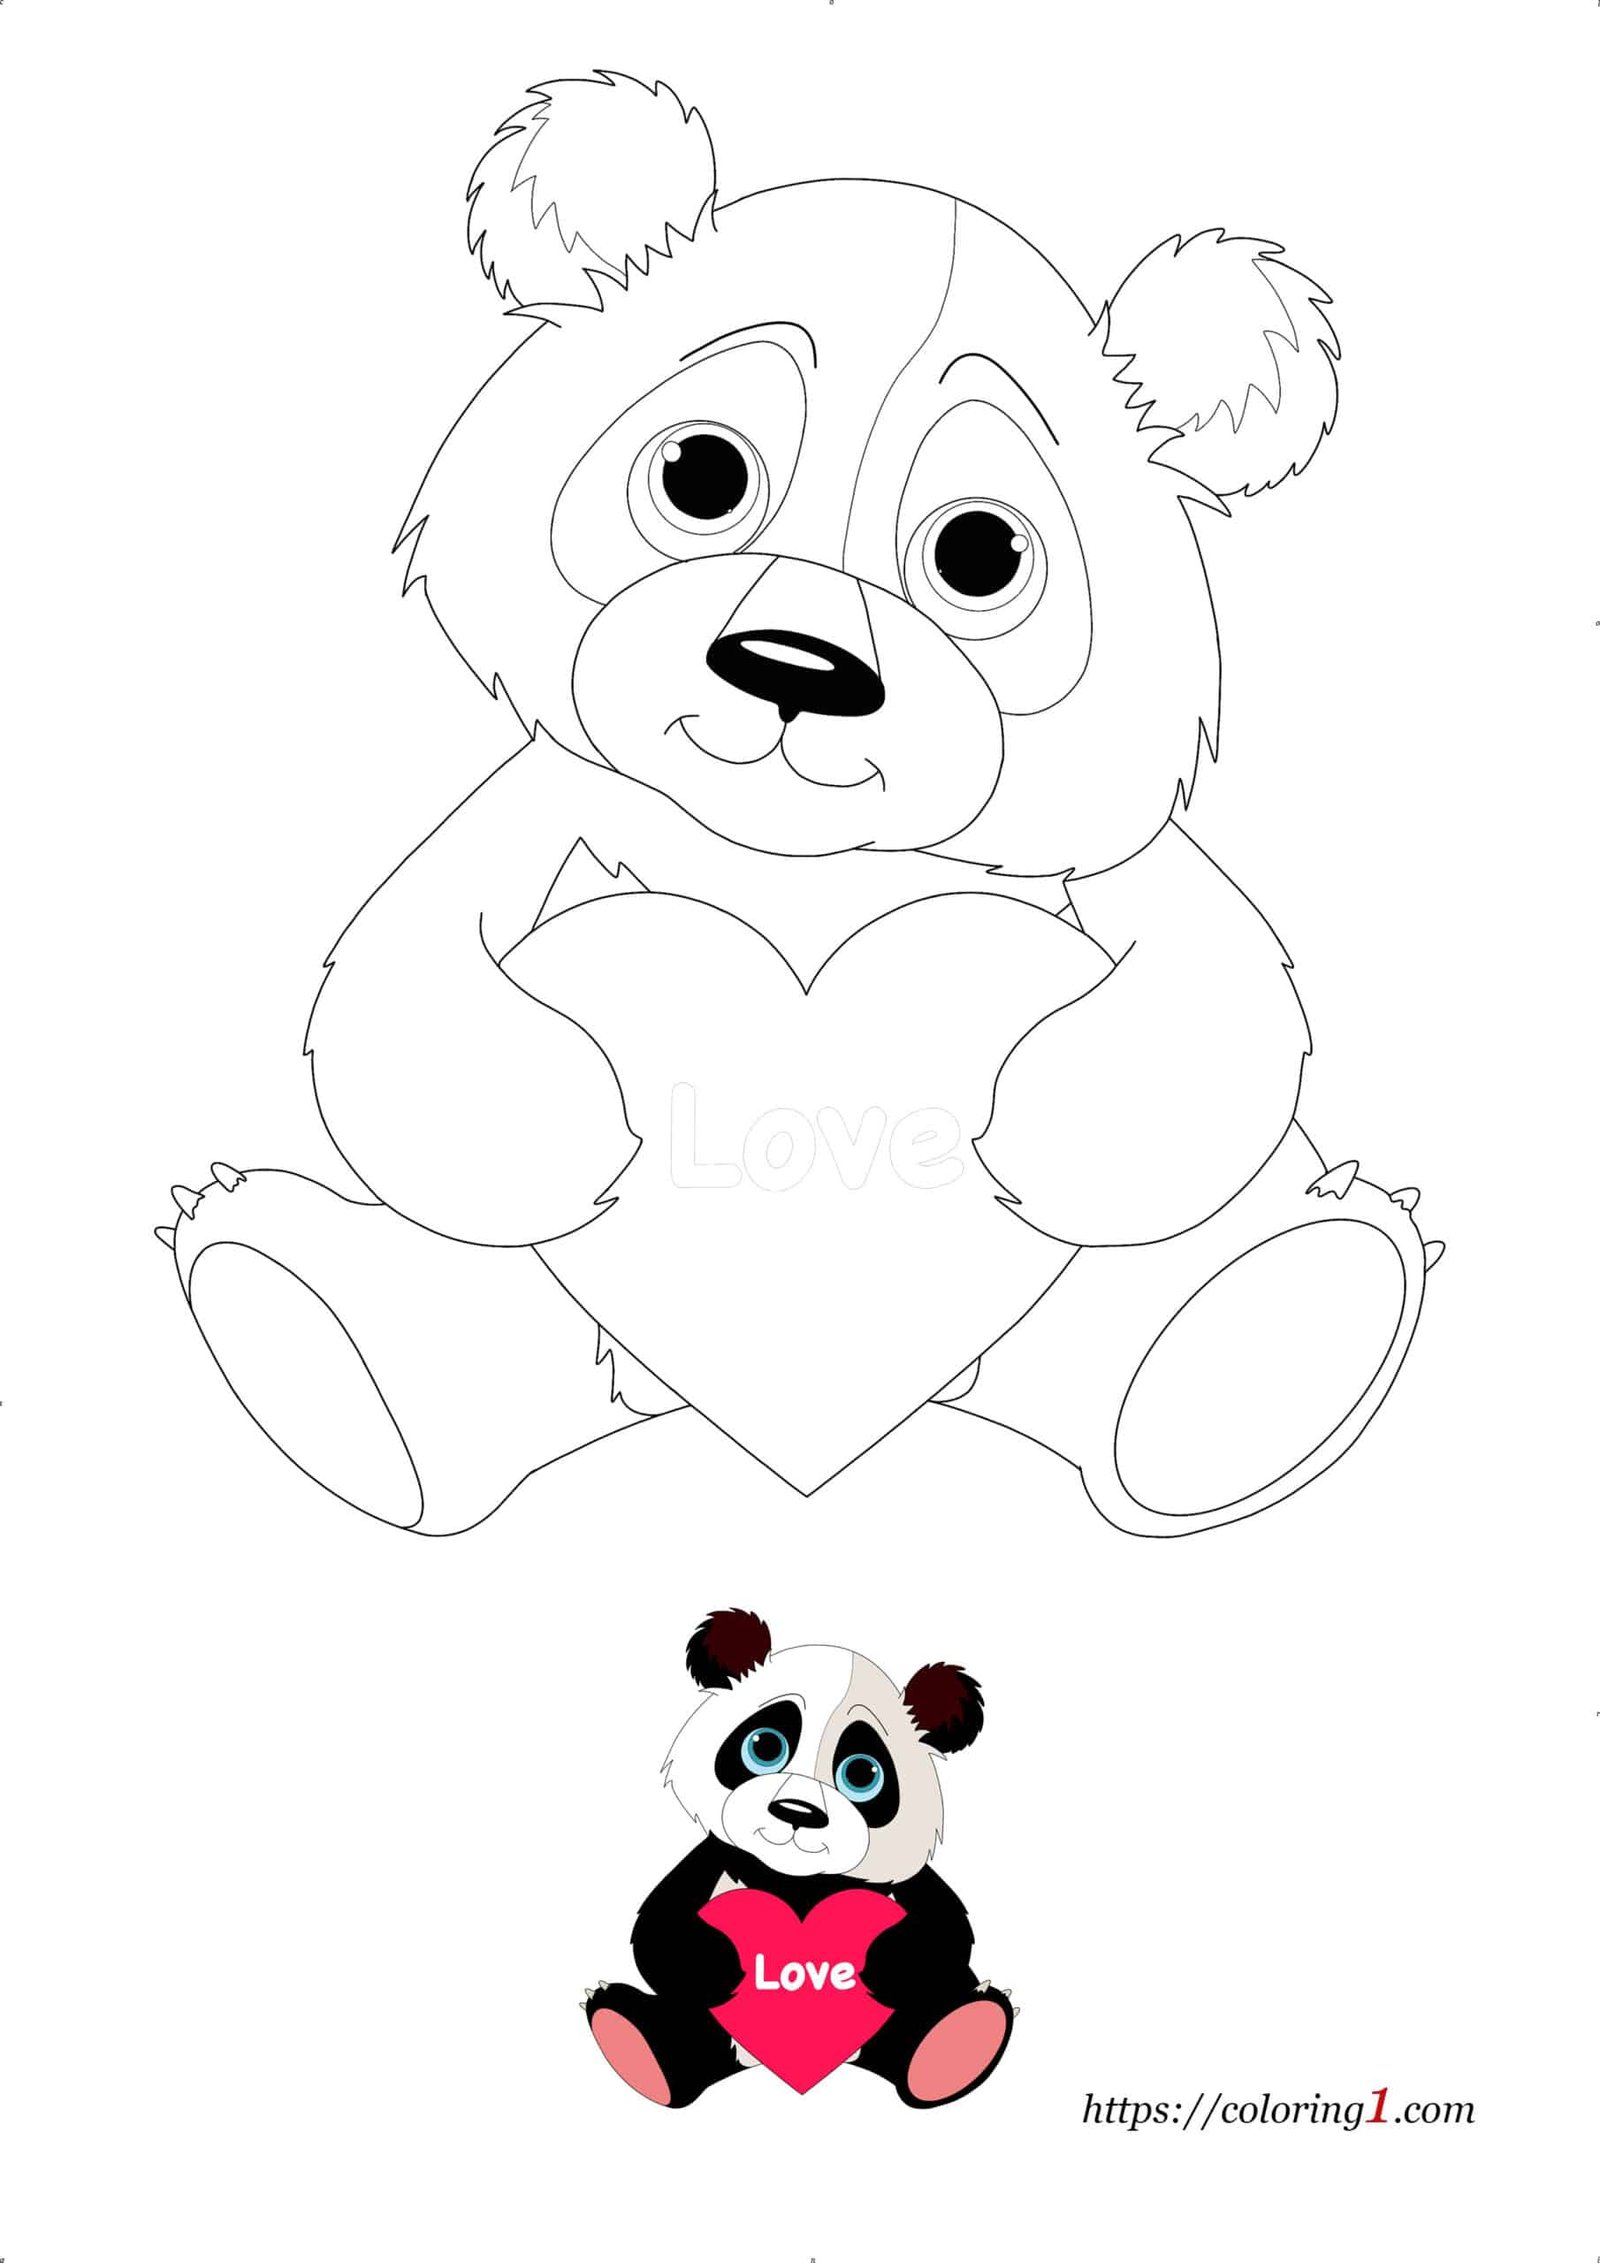 Panda with Heart cute coloring book page